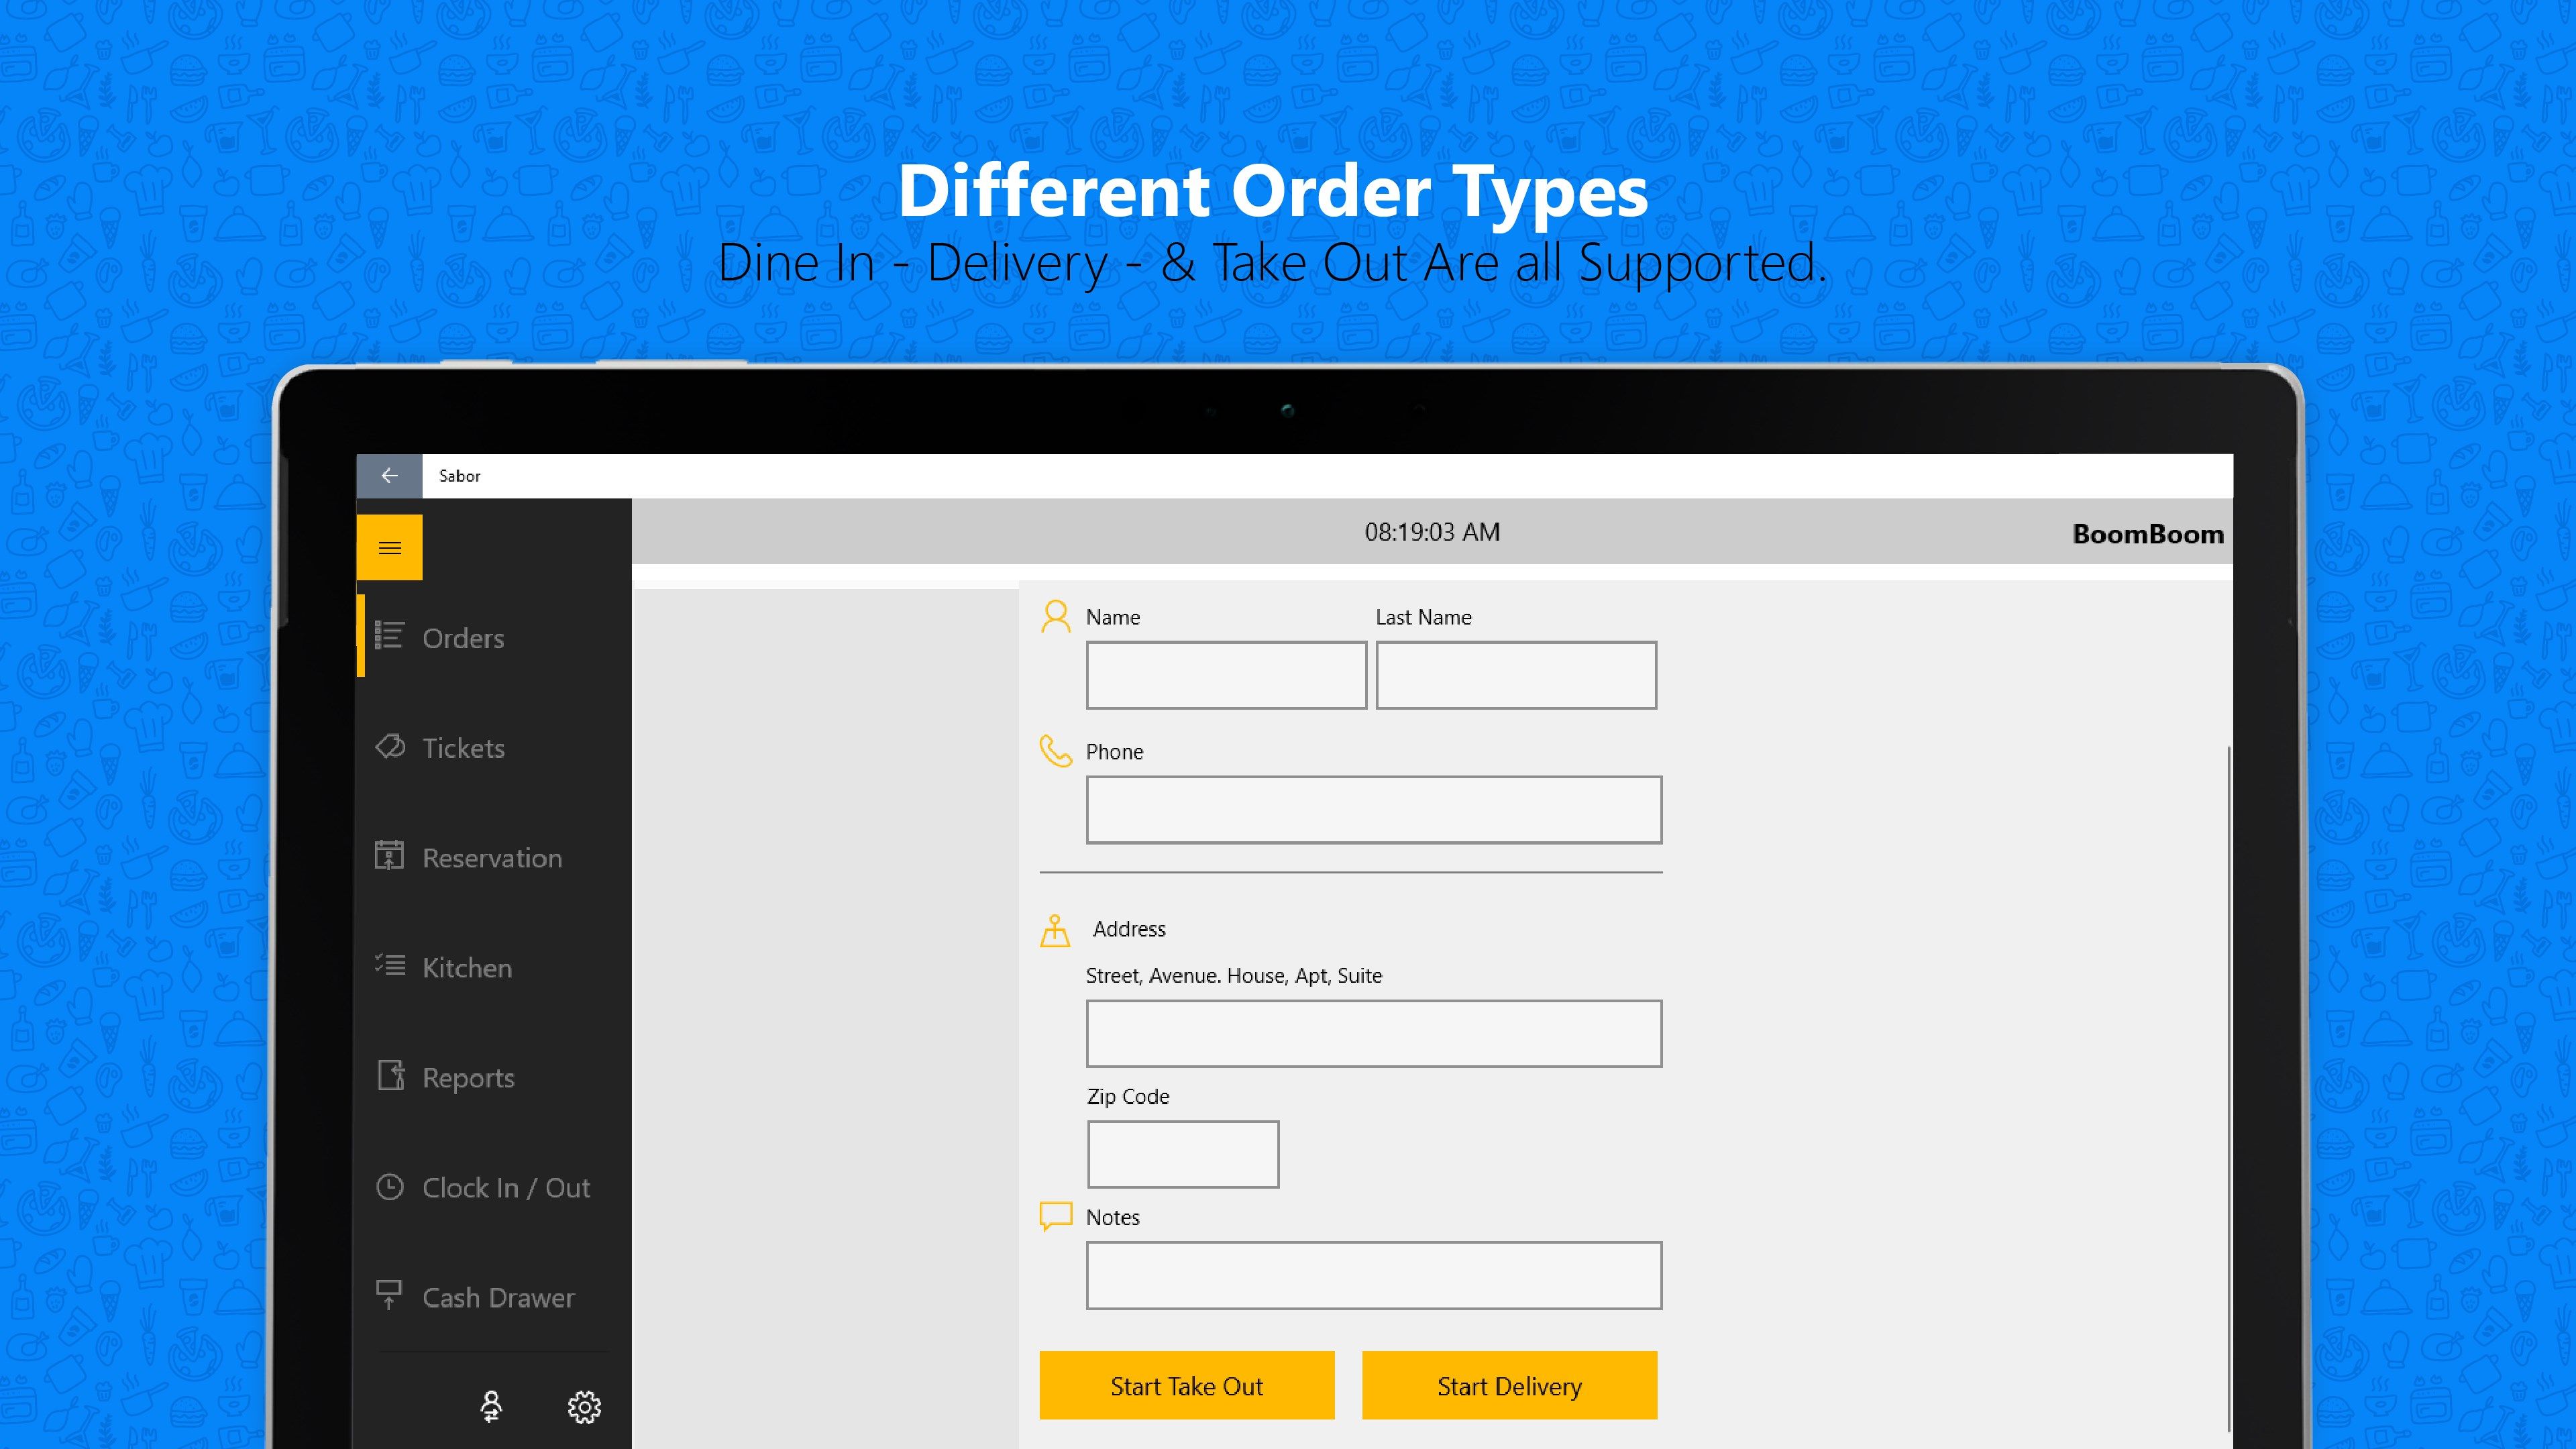 Multiple order types such as Delivery / Take Out / Quick Serve